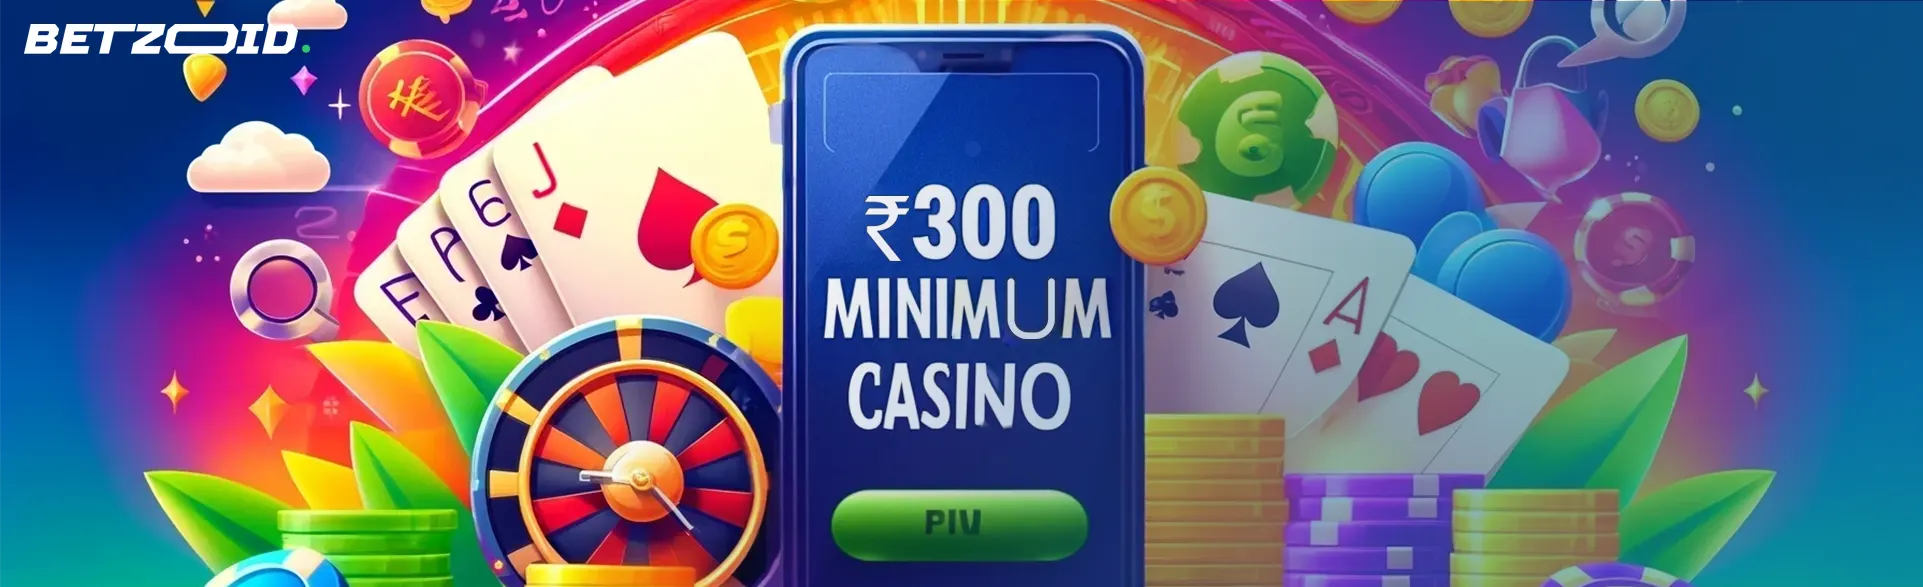 Mobile phone displaying '₹300 Minimum Casino' with colorful casino elements like playing cards, roulette wheel, and poker chips in the background.